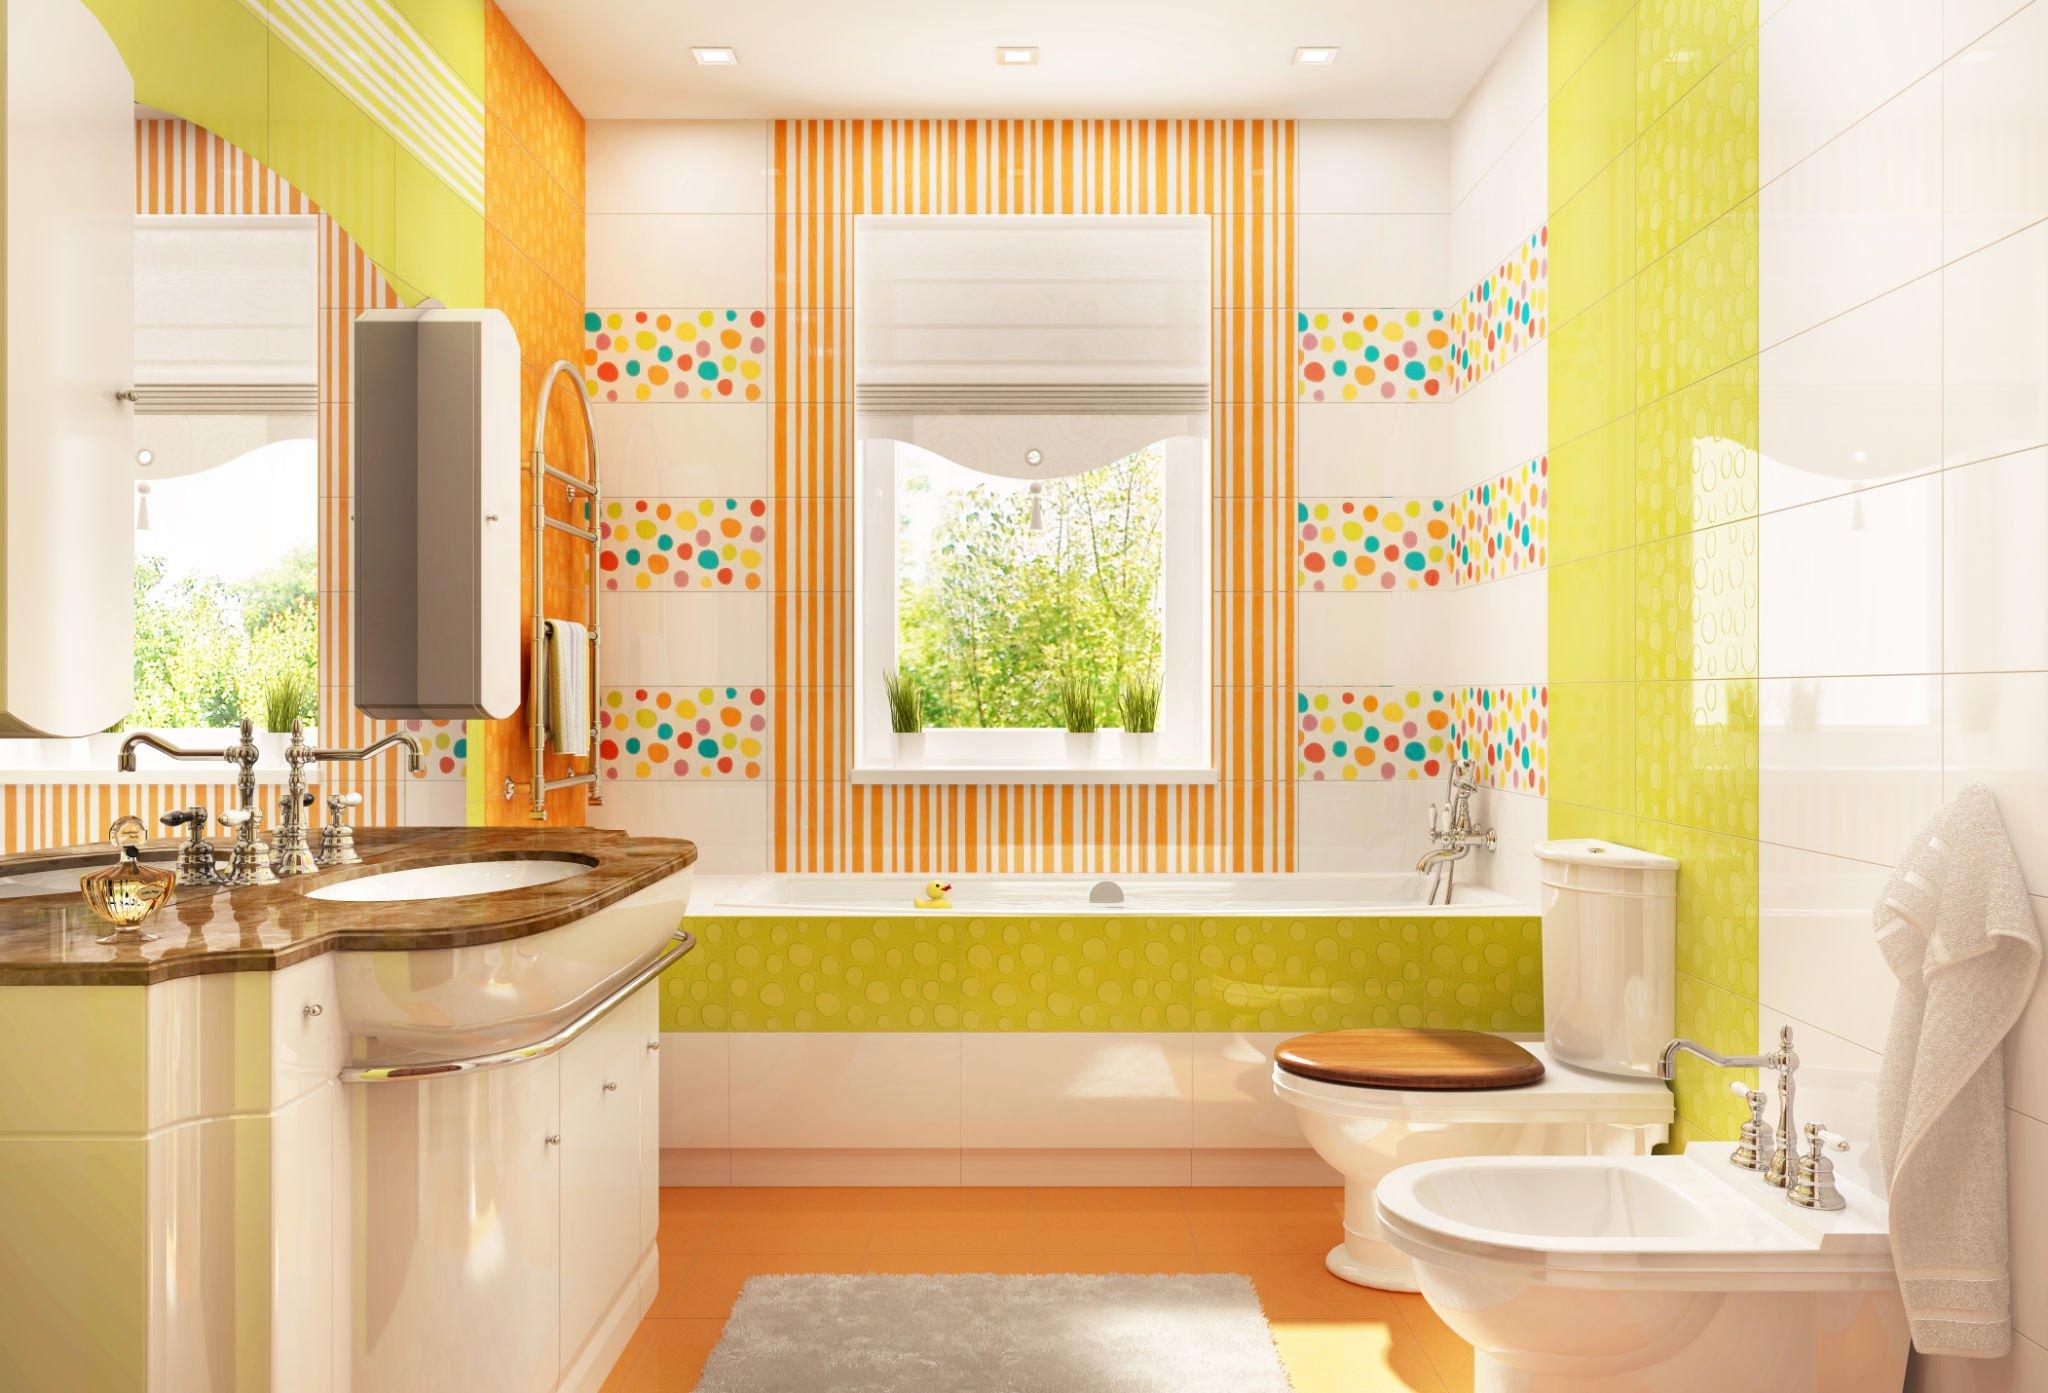 A Complete Guide on Bathroom Renovation in Sydney